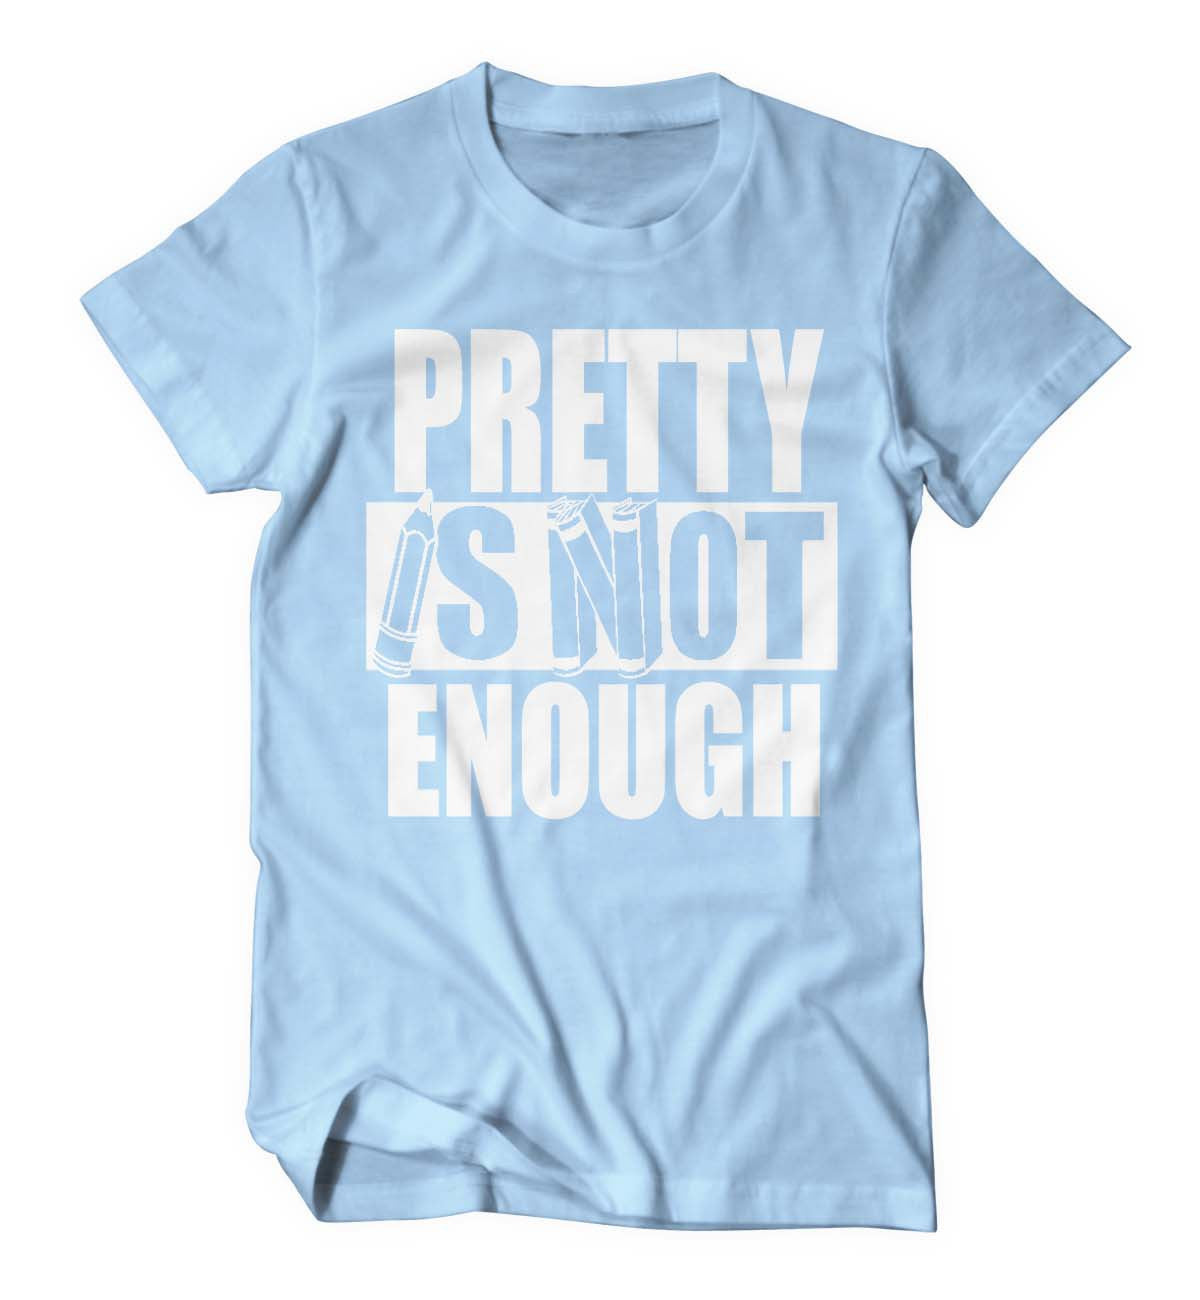 Pretty Is Not Enough Student Shirt (SkyBlue/White)(Youth)